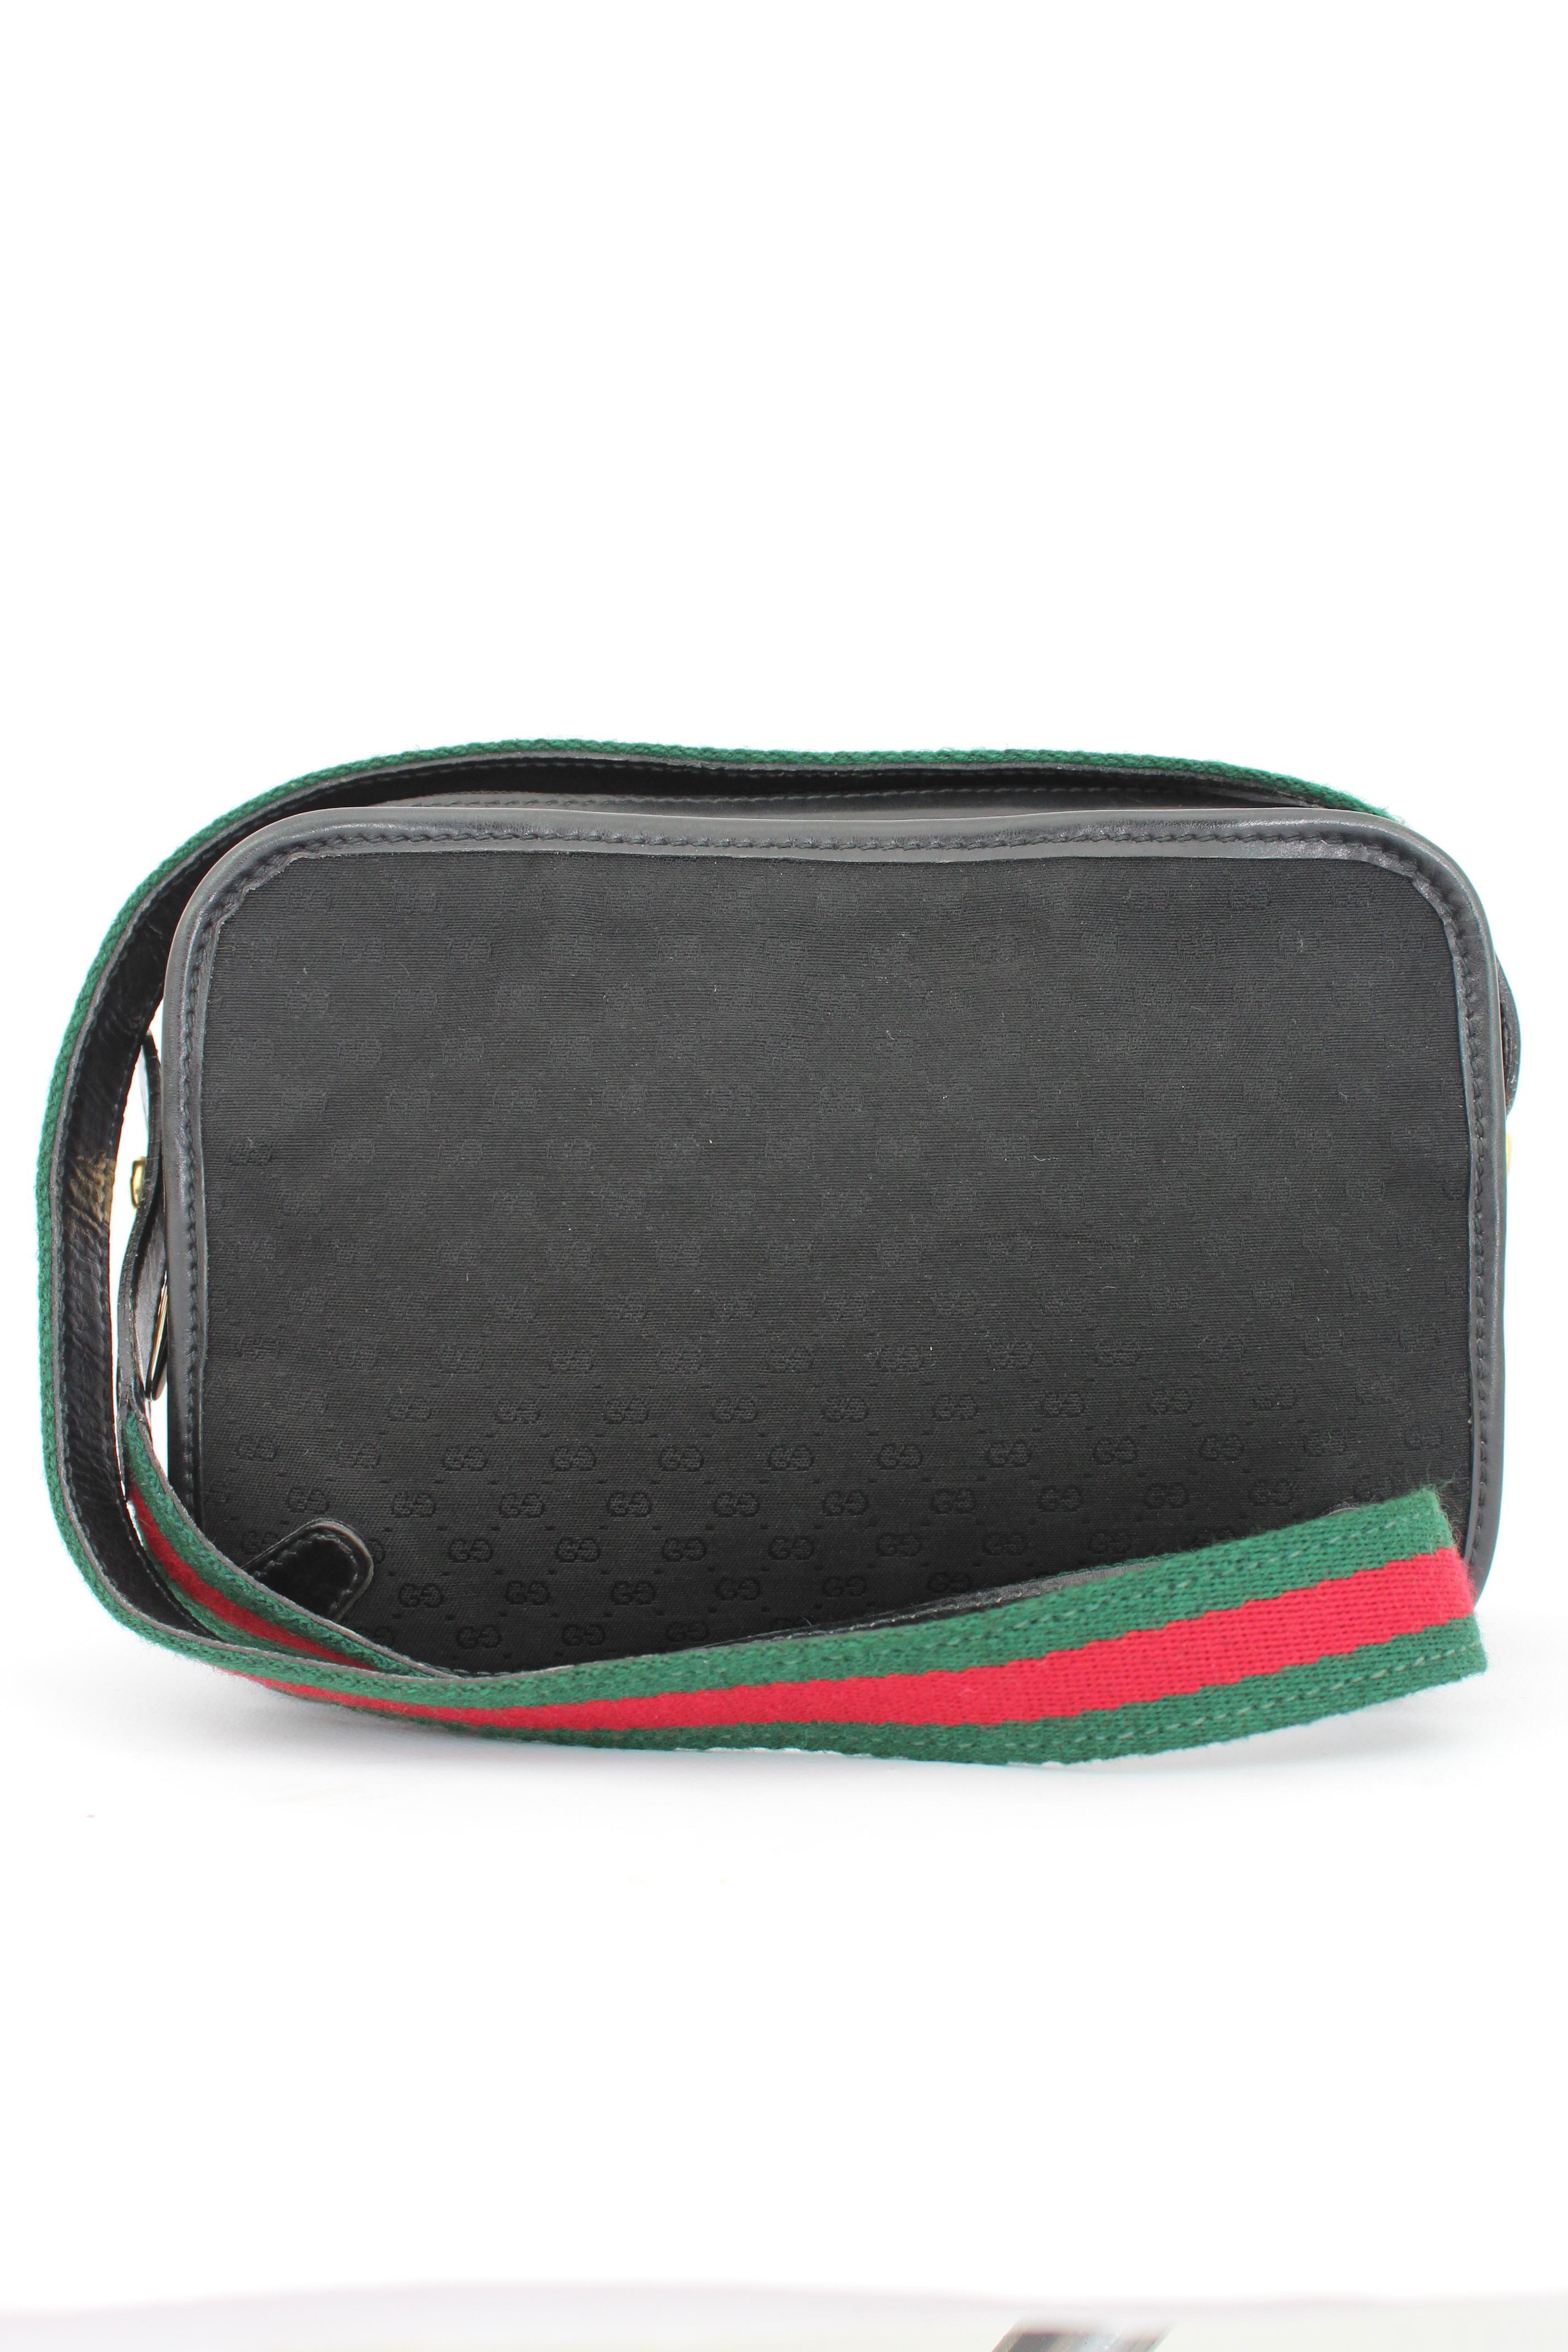 Gucci vintage 80s shoulder bag. Camera bag model, black color and gold-colored details. Tone-on-tone monogram pattern. Green and red shoulder strap, typical colors of the fashion house. Bag with three compartments, each closed by branded zippers.